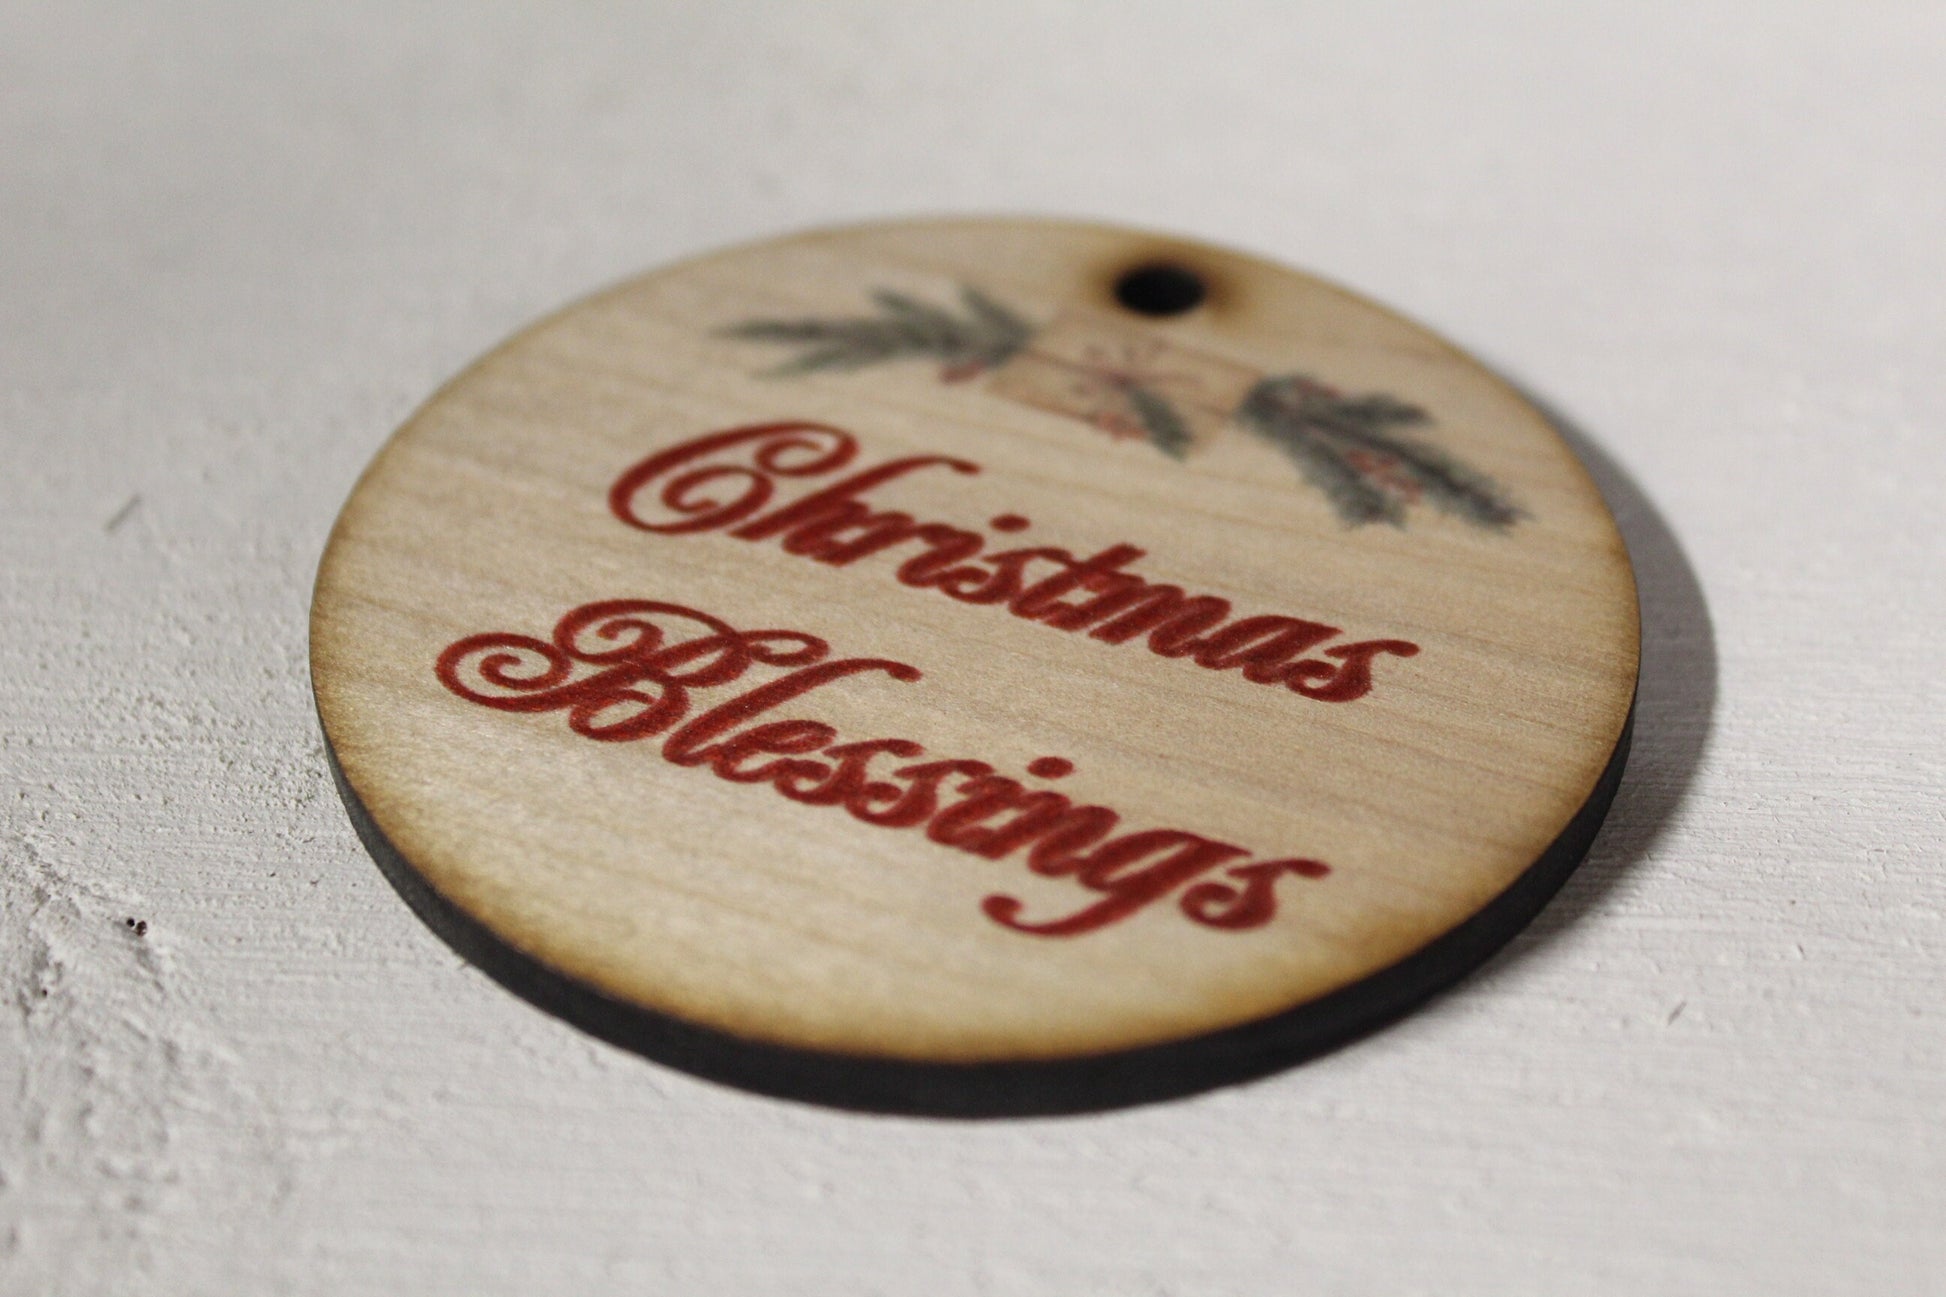 Christmas Blessings Christmas Ornament Keychain Gift White elephant Gift Tag Package Holiday Handmade Round Woodslice